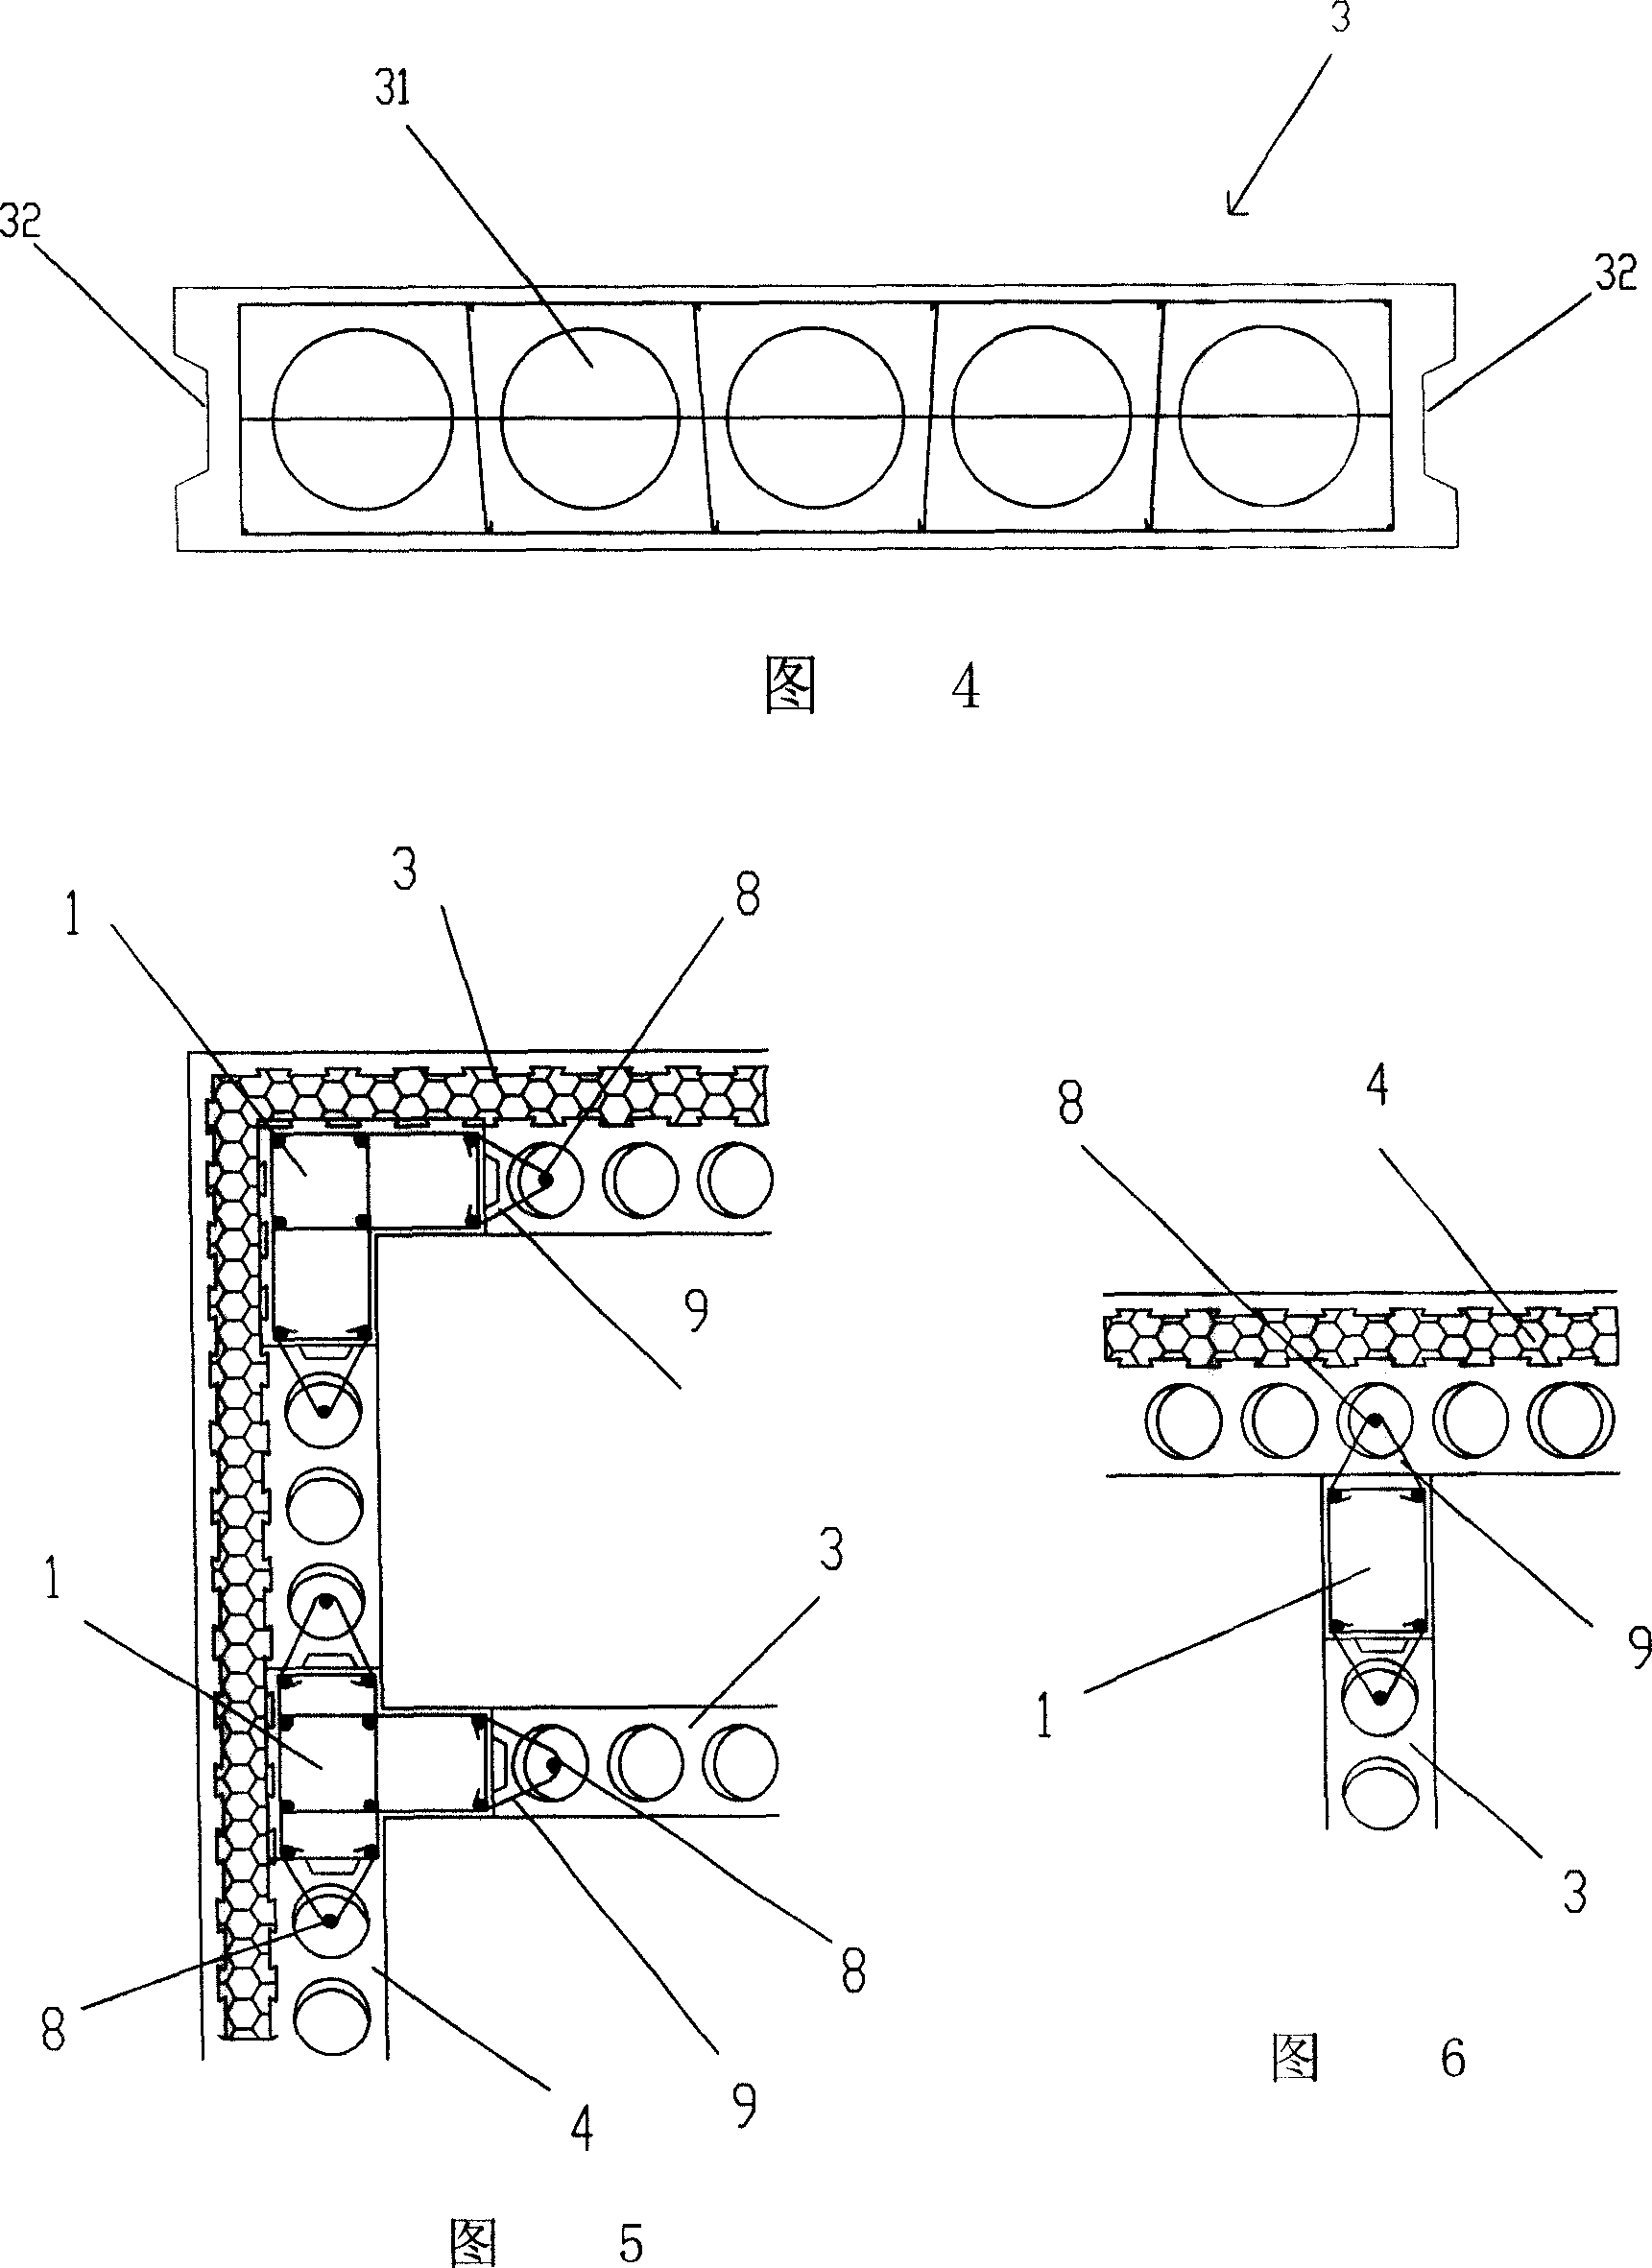 Architectural structure system of preformed hollow load-bearing wall panel and construction method